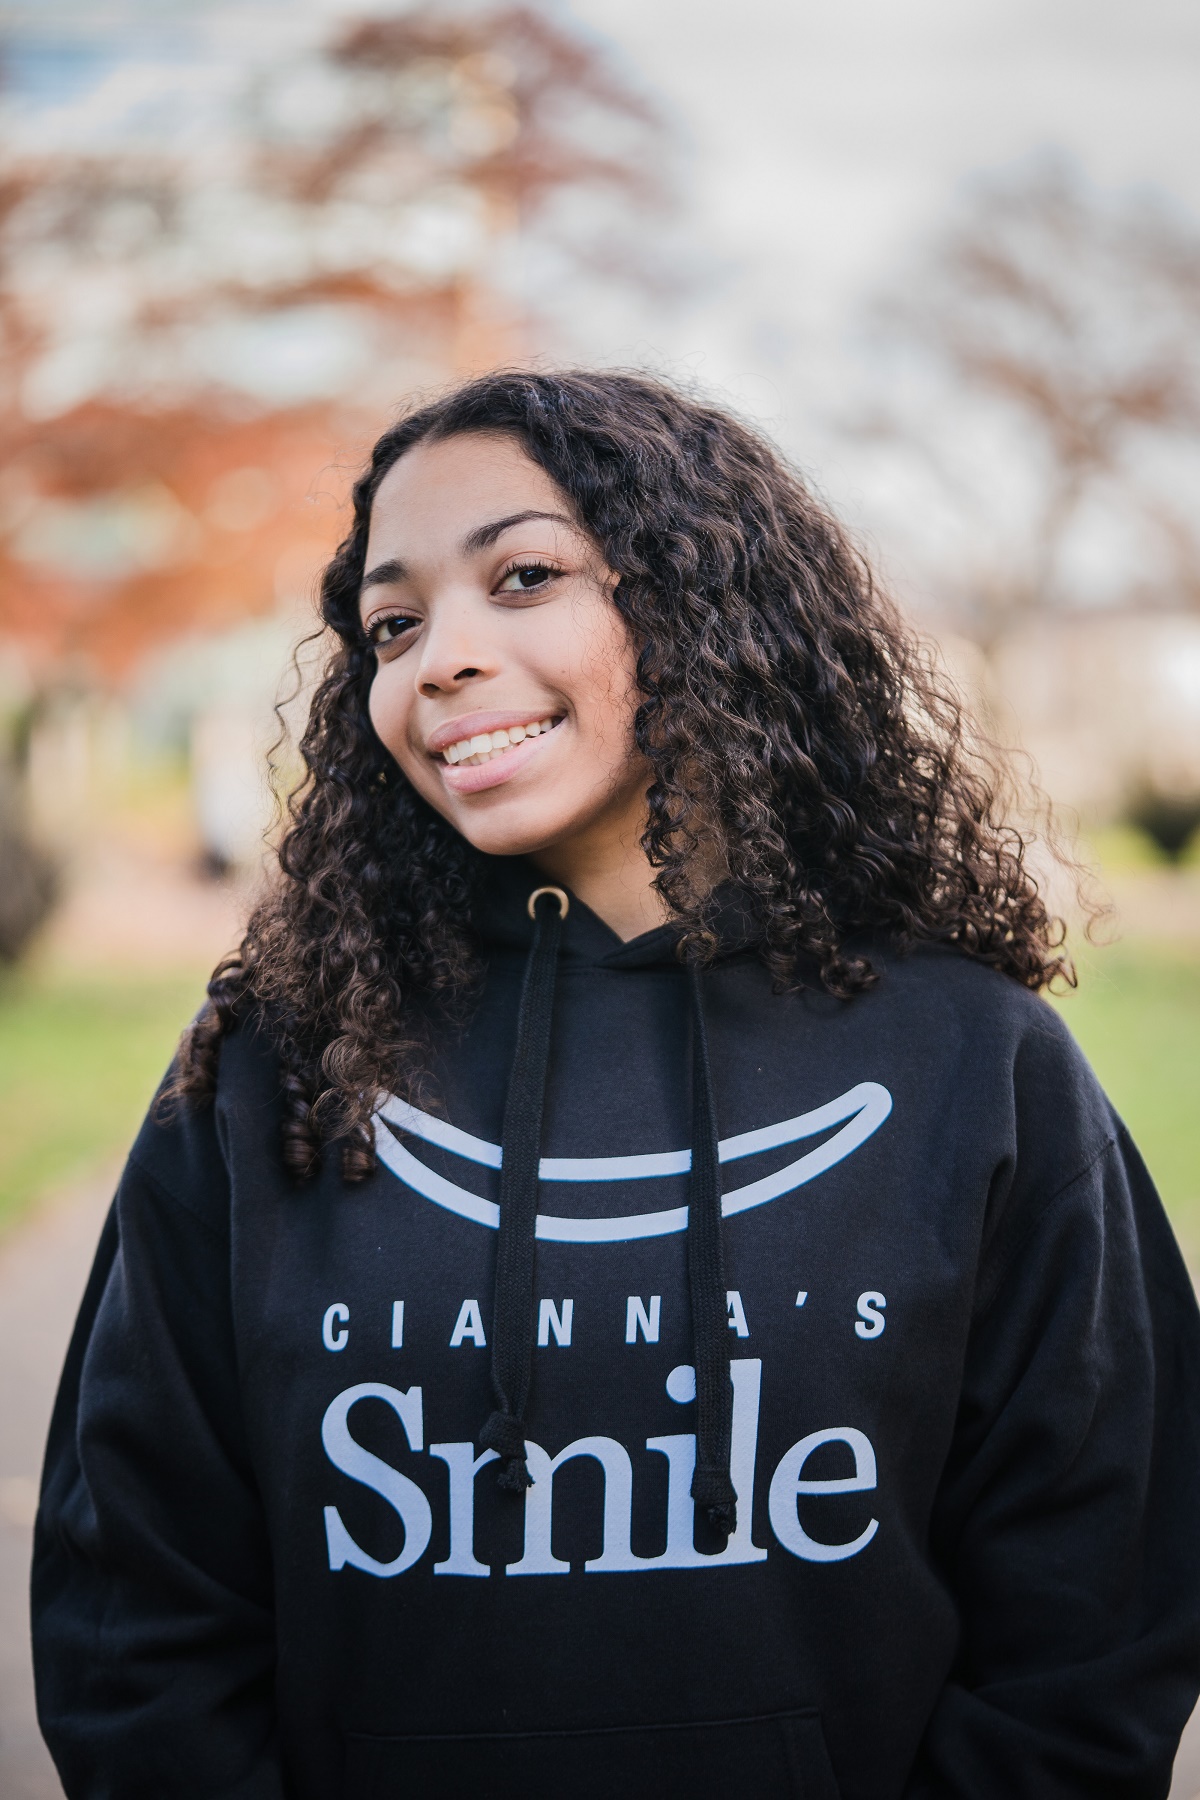 Cianna smiling in a hoodie that says "Cianna's Smile"